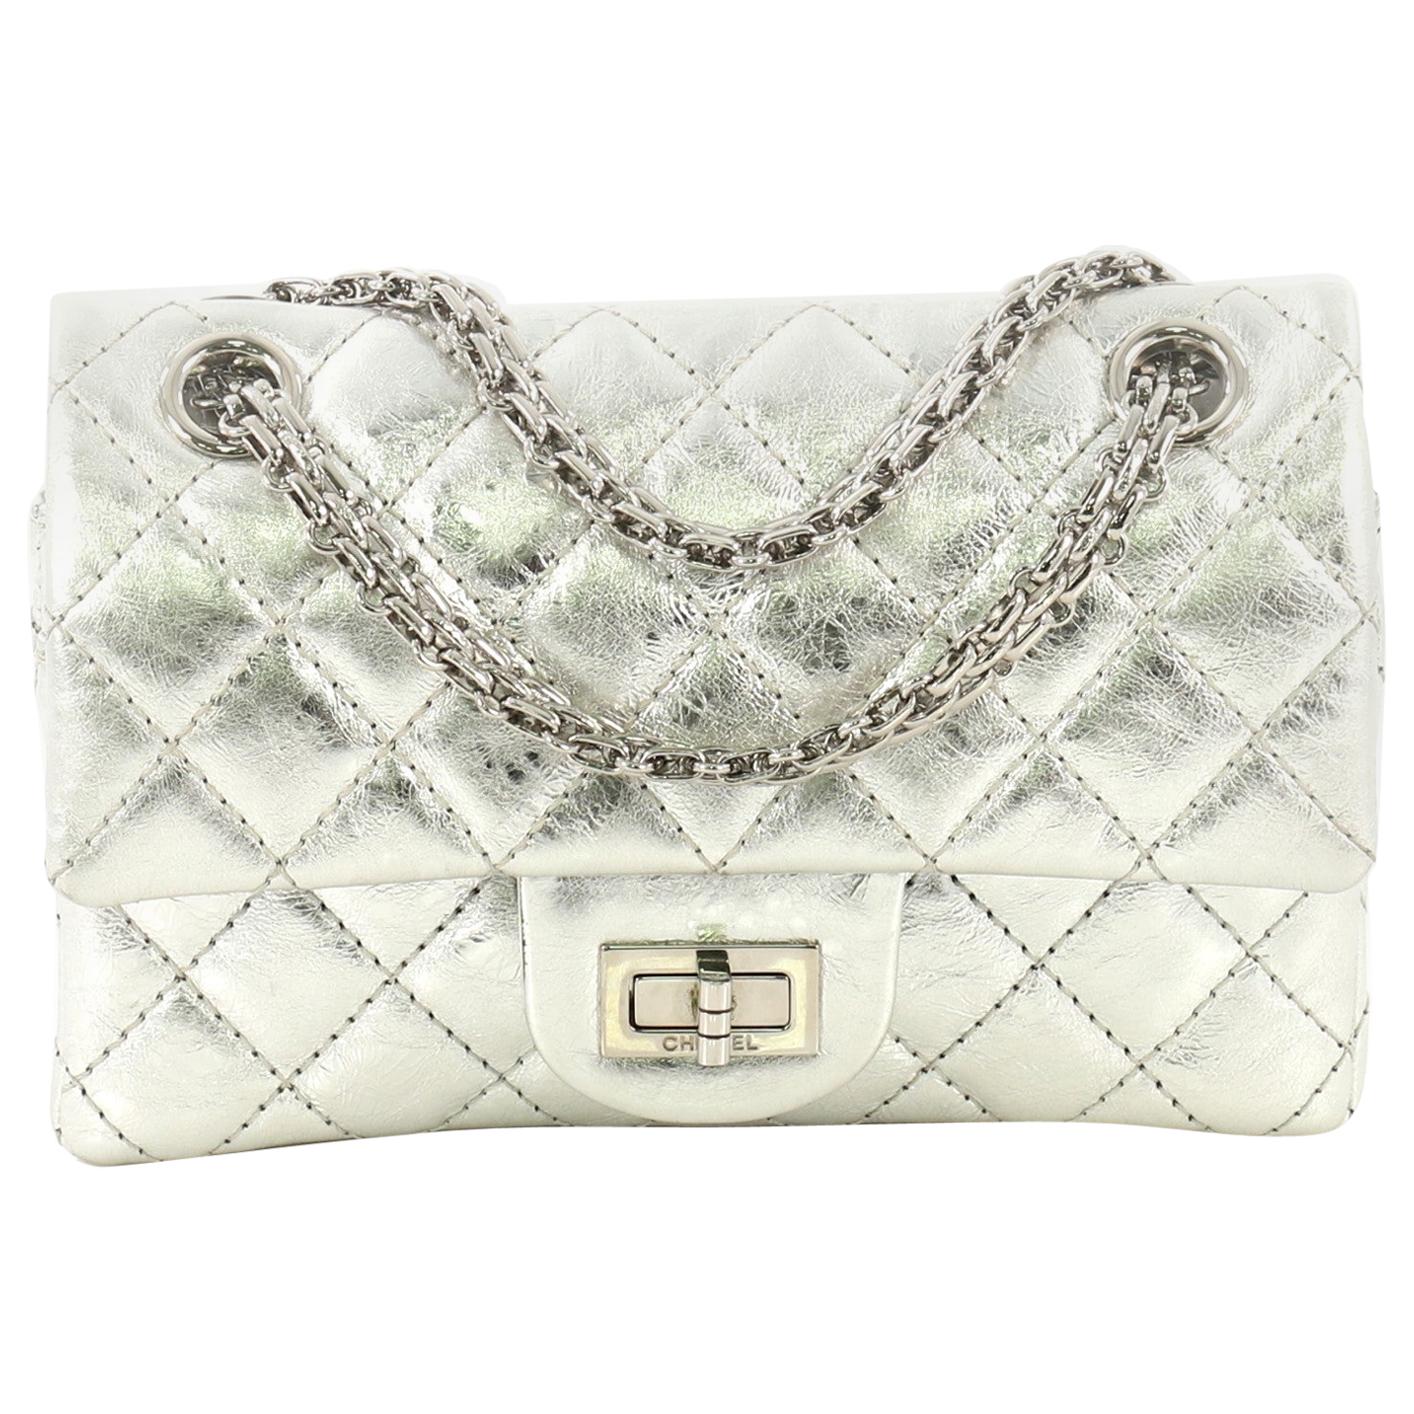 Chanel Reissue 2.55 Flap Bag Quilted Metallic Aged Calfskin 224